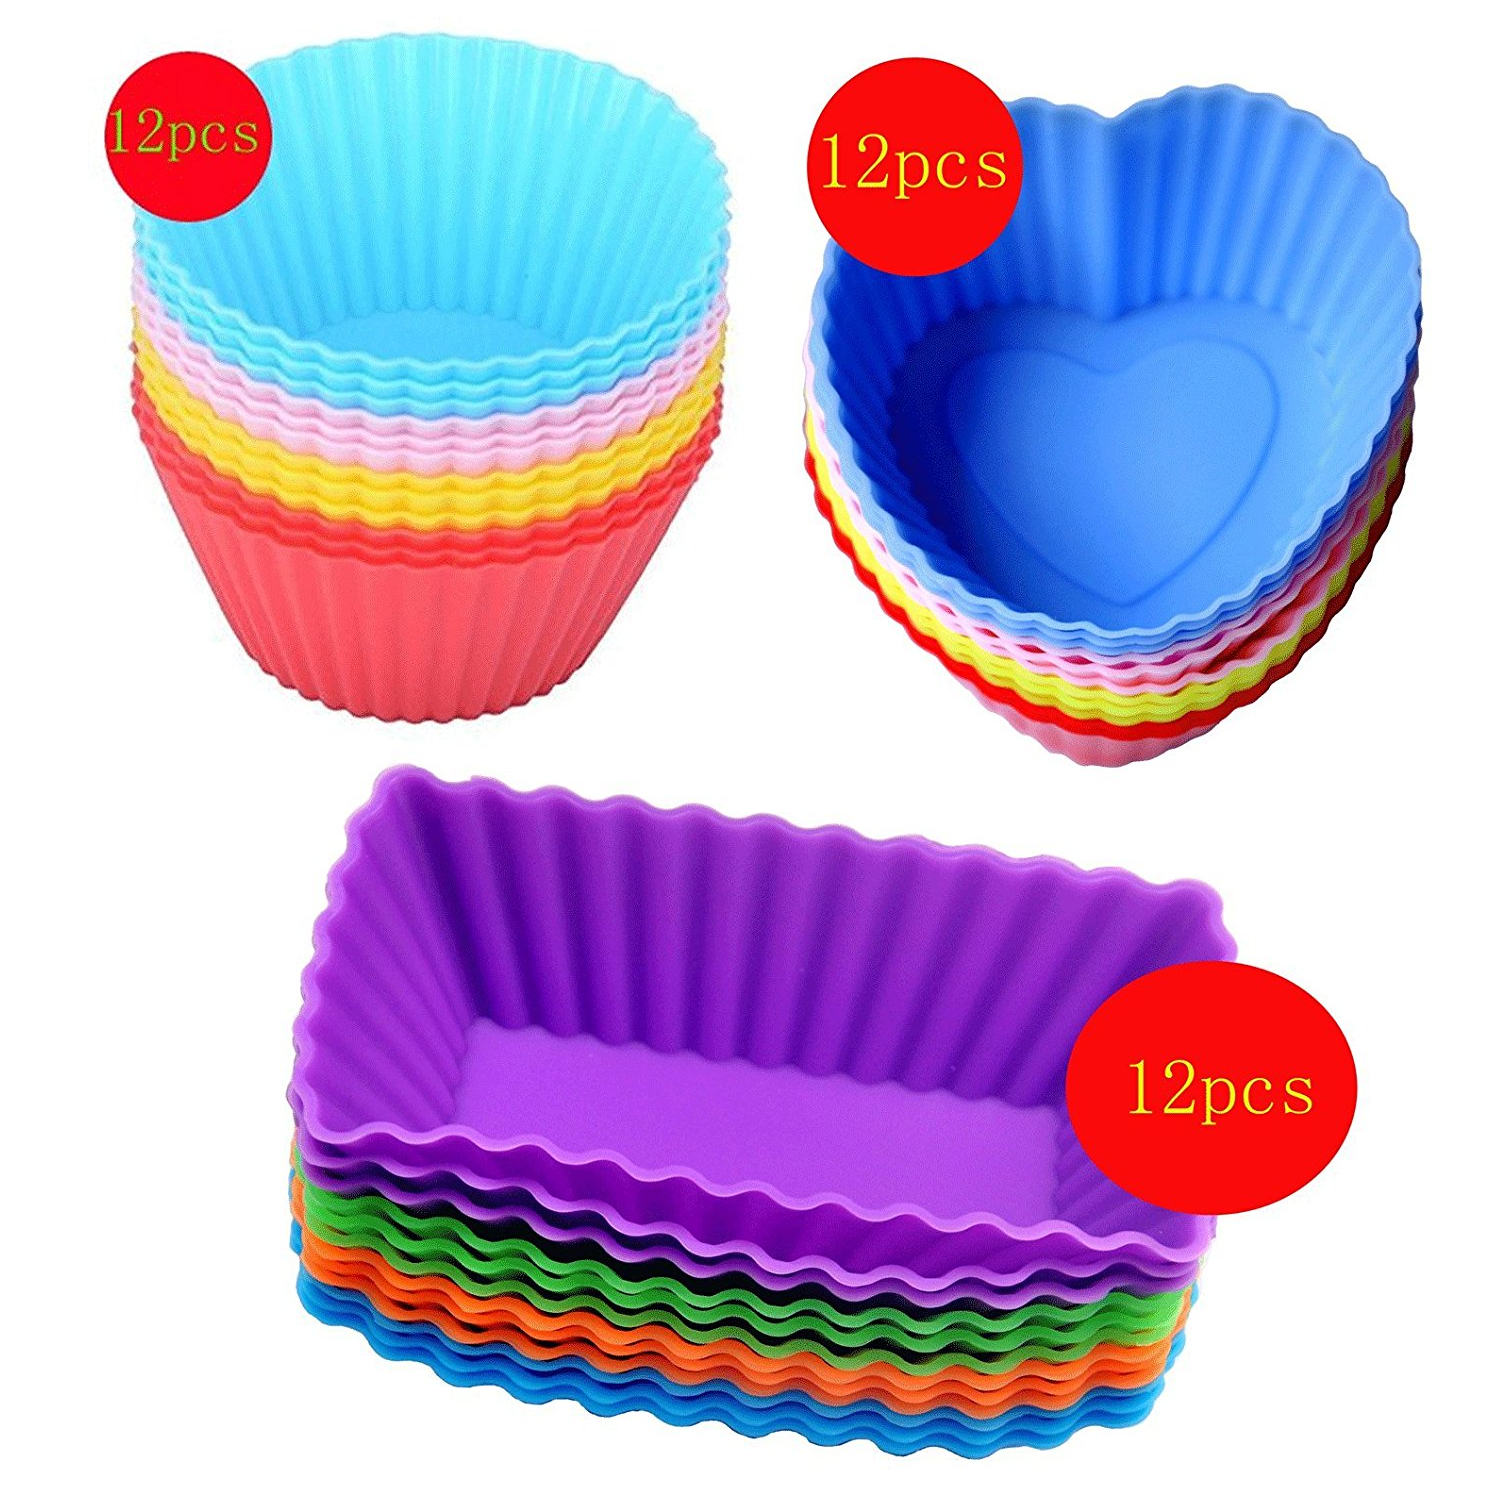 Pack of 36 Silicone Baking Cupcake Liners Only $6.99 on Amazon!